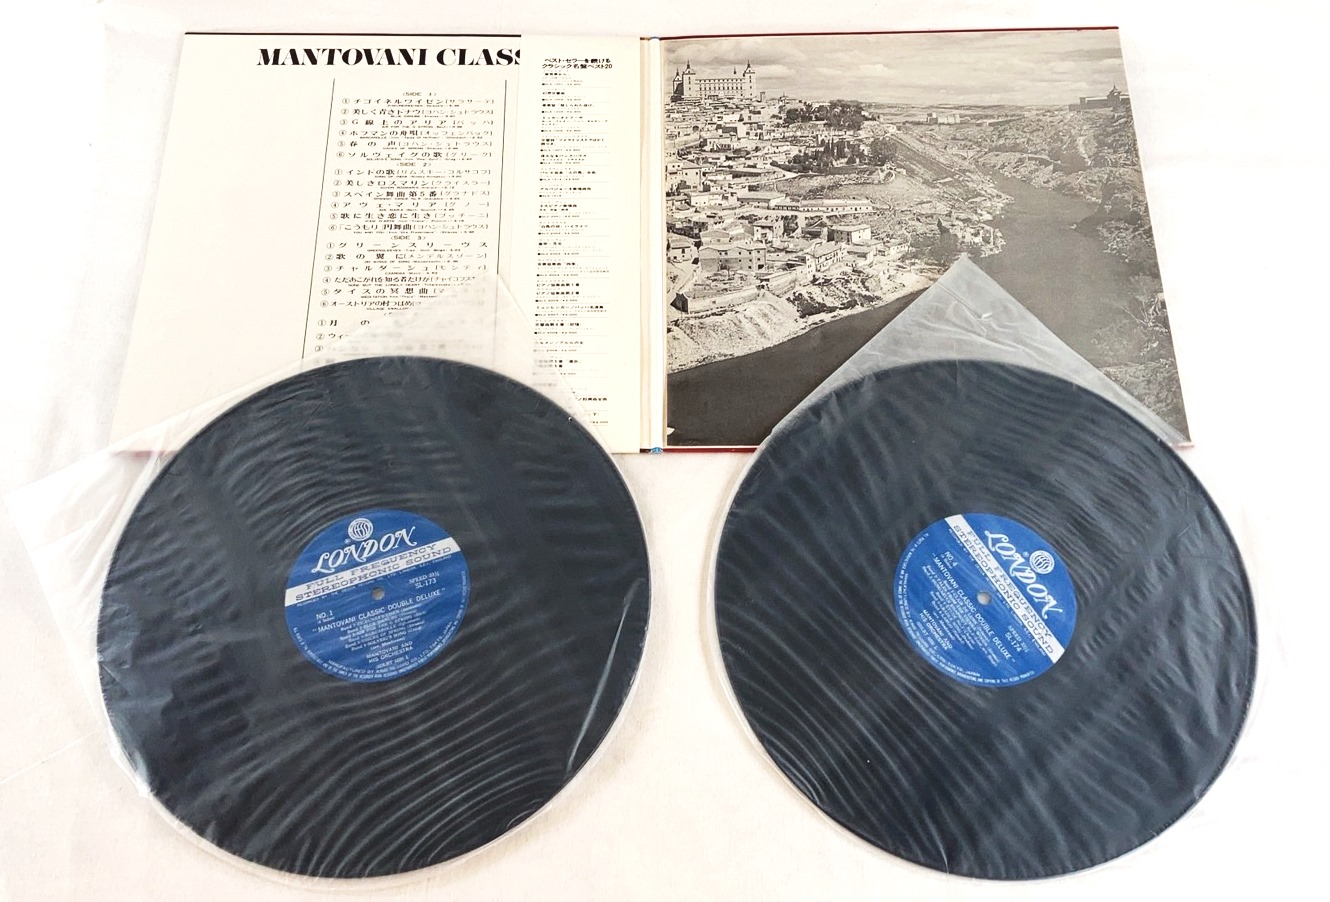  mantle va-ni masterpiece concert double Deluxe used record LP 2 sheets set 20230801